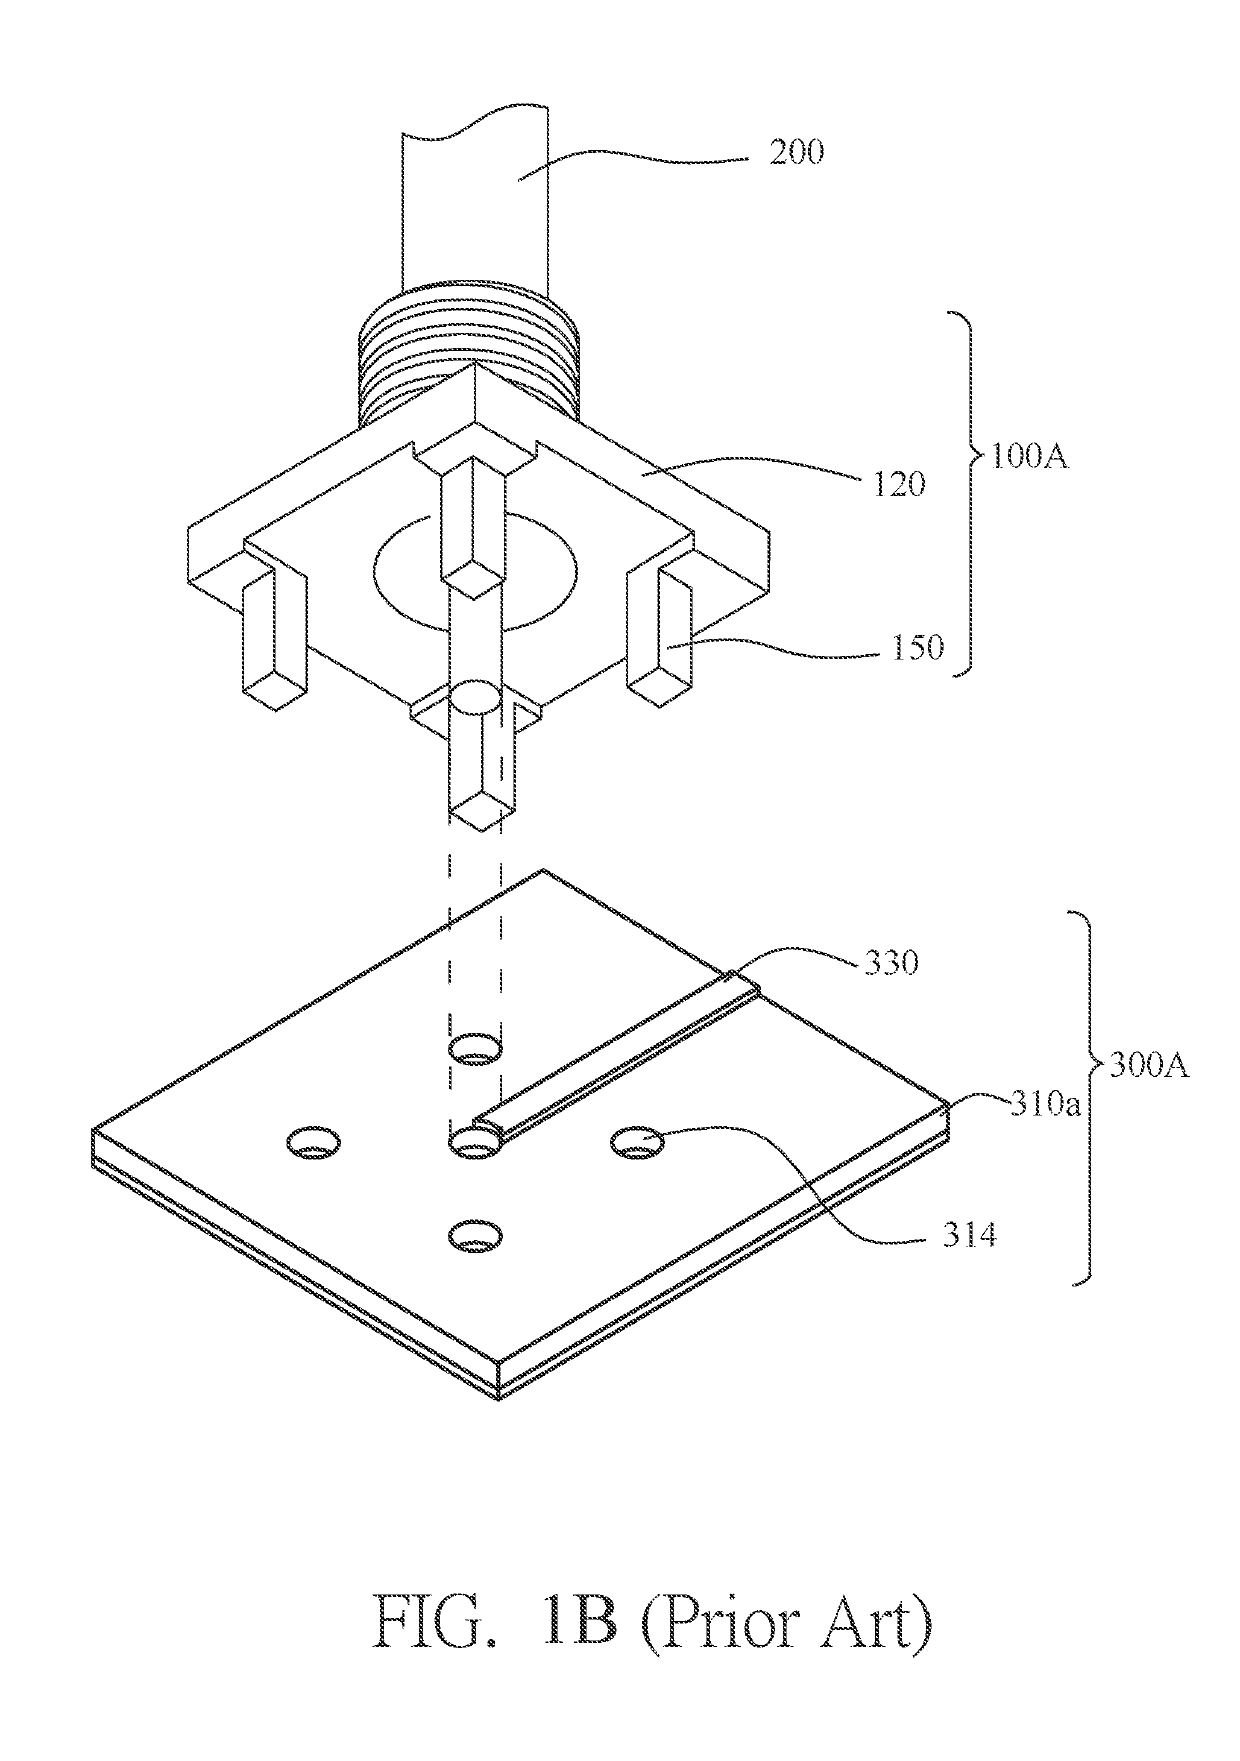 Vertical transition method applied between coaxial structure and microstrip line